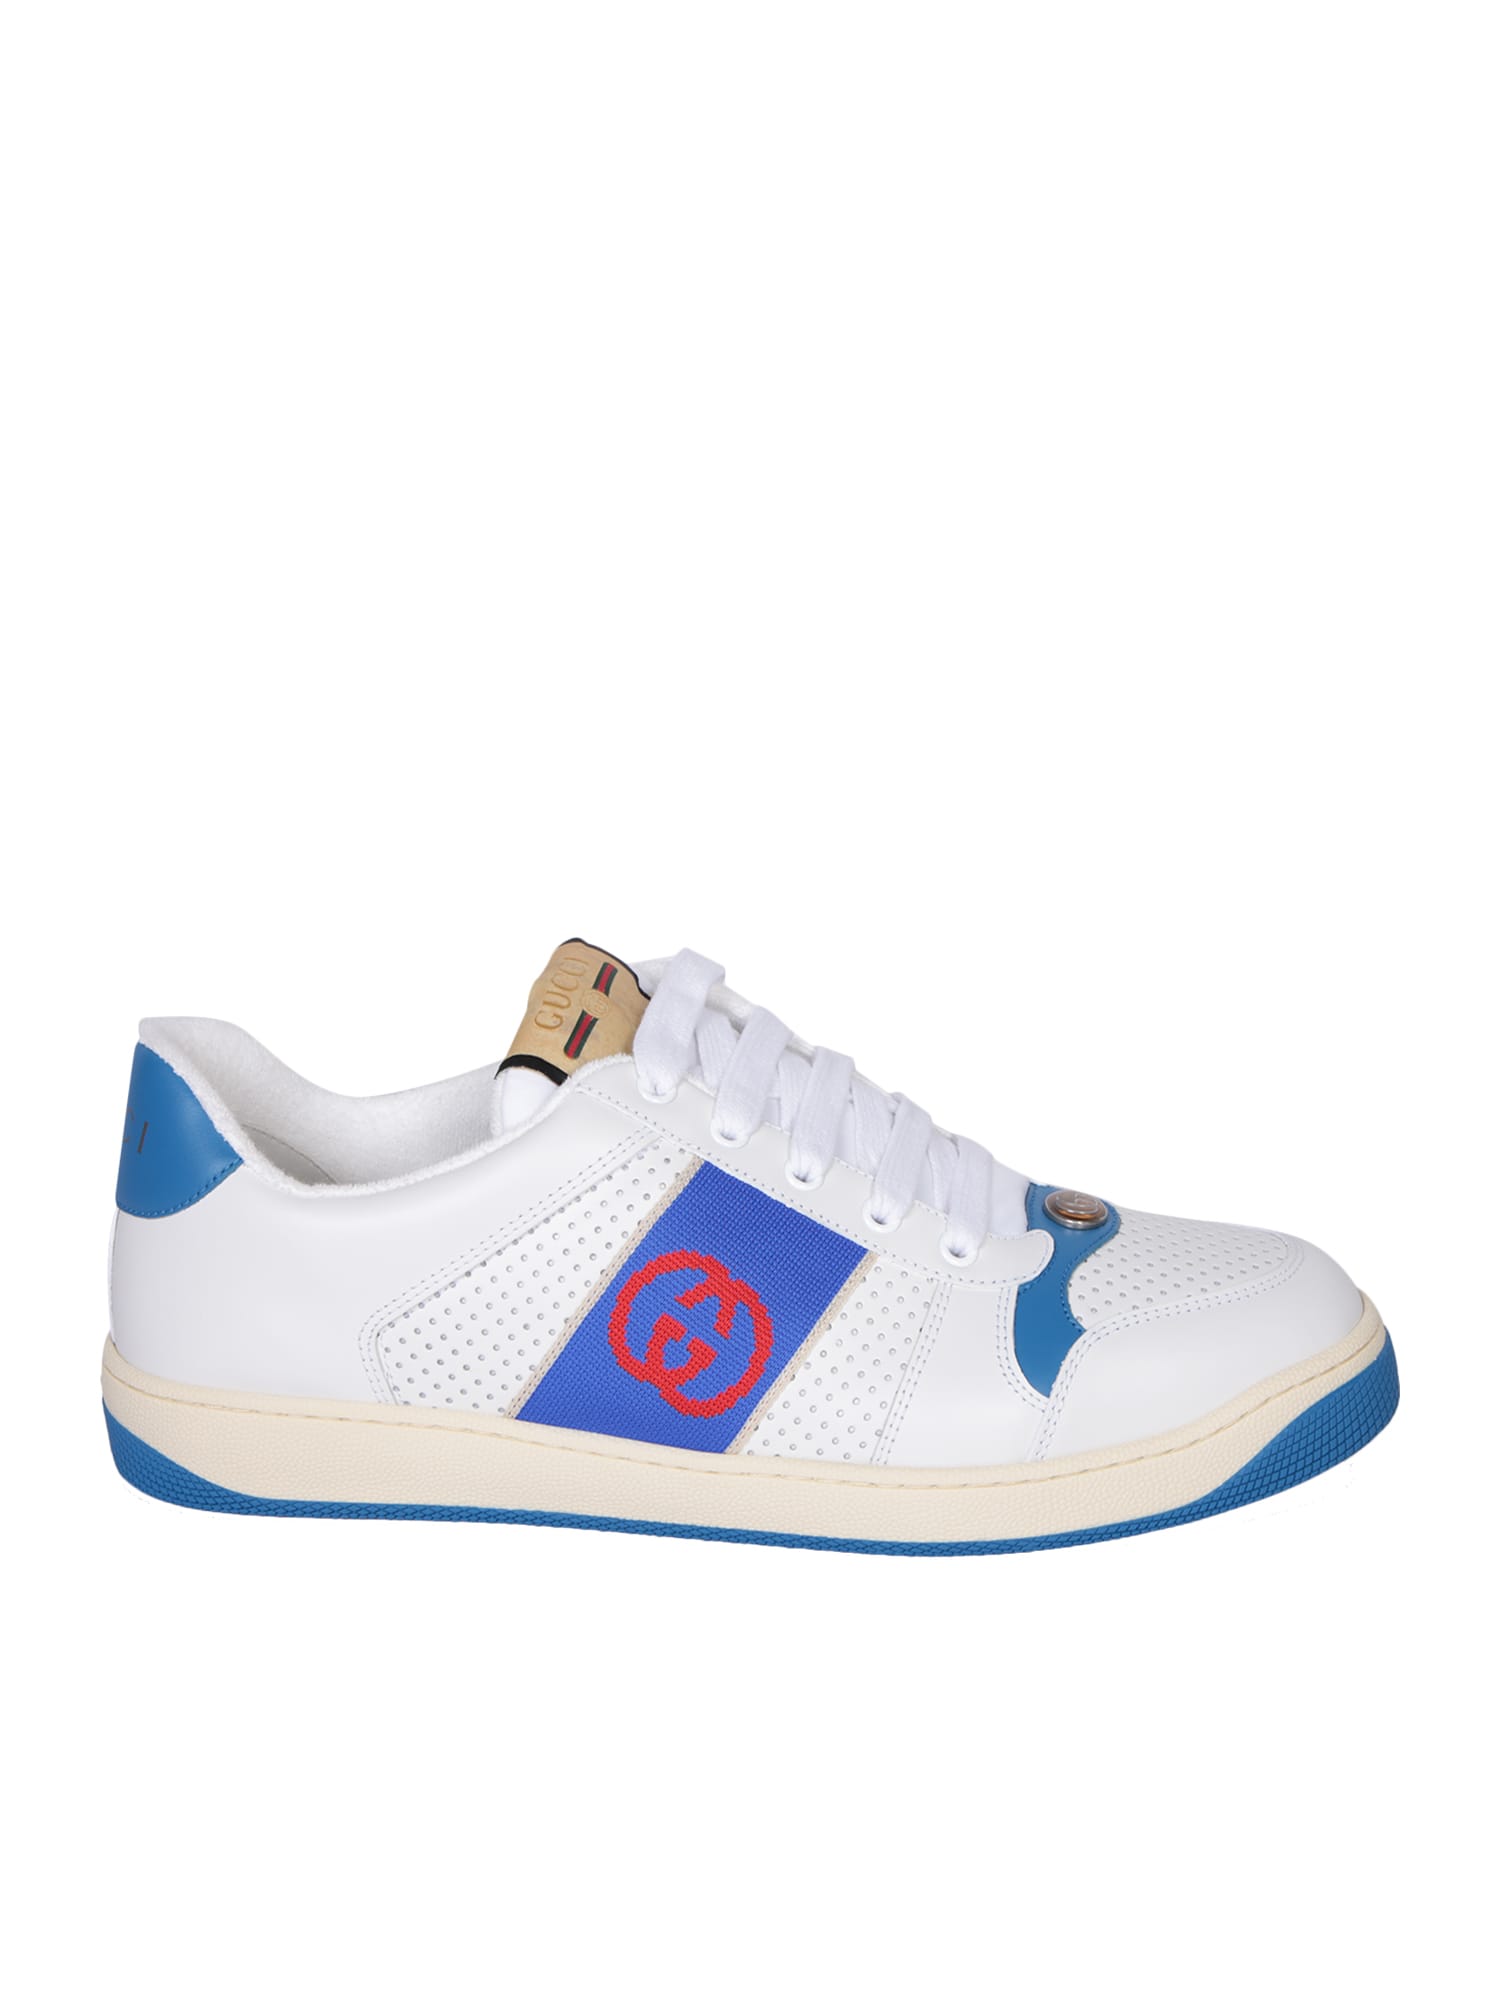 Gucci Screener Gg Blue/red Sneakers In White